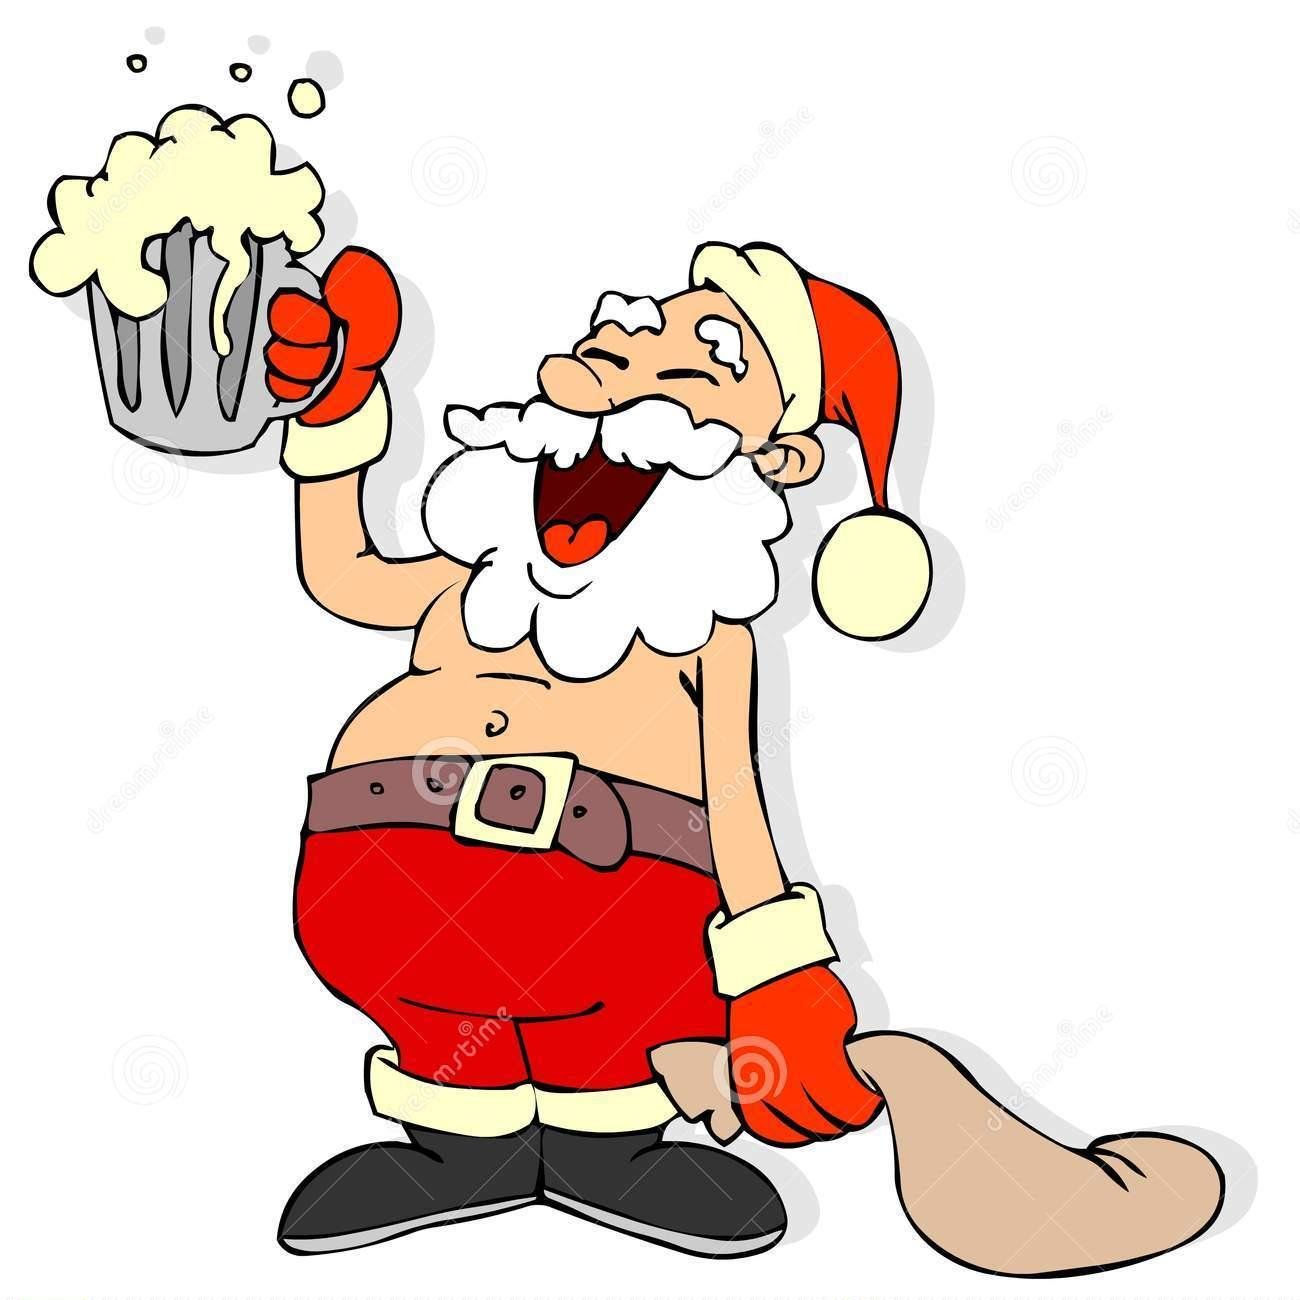 1st annual SantaCon Thousand Oaks, Ca will be on Saturday, December 20, 2014- starting at 5:00pm at The Tipsy Goat. Games, live music, raffle, ho, ho, hos!